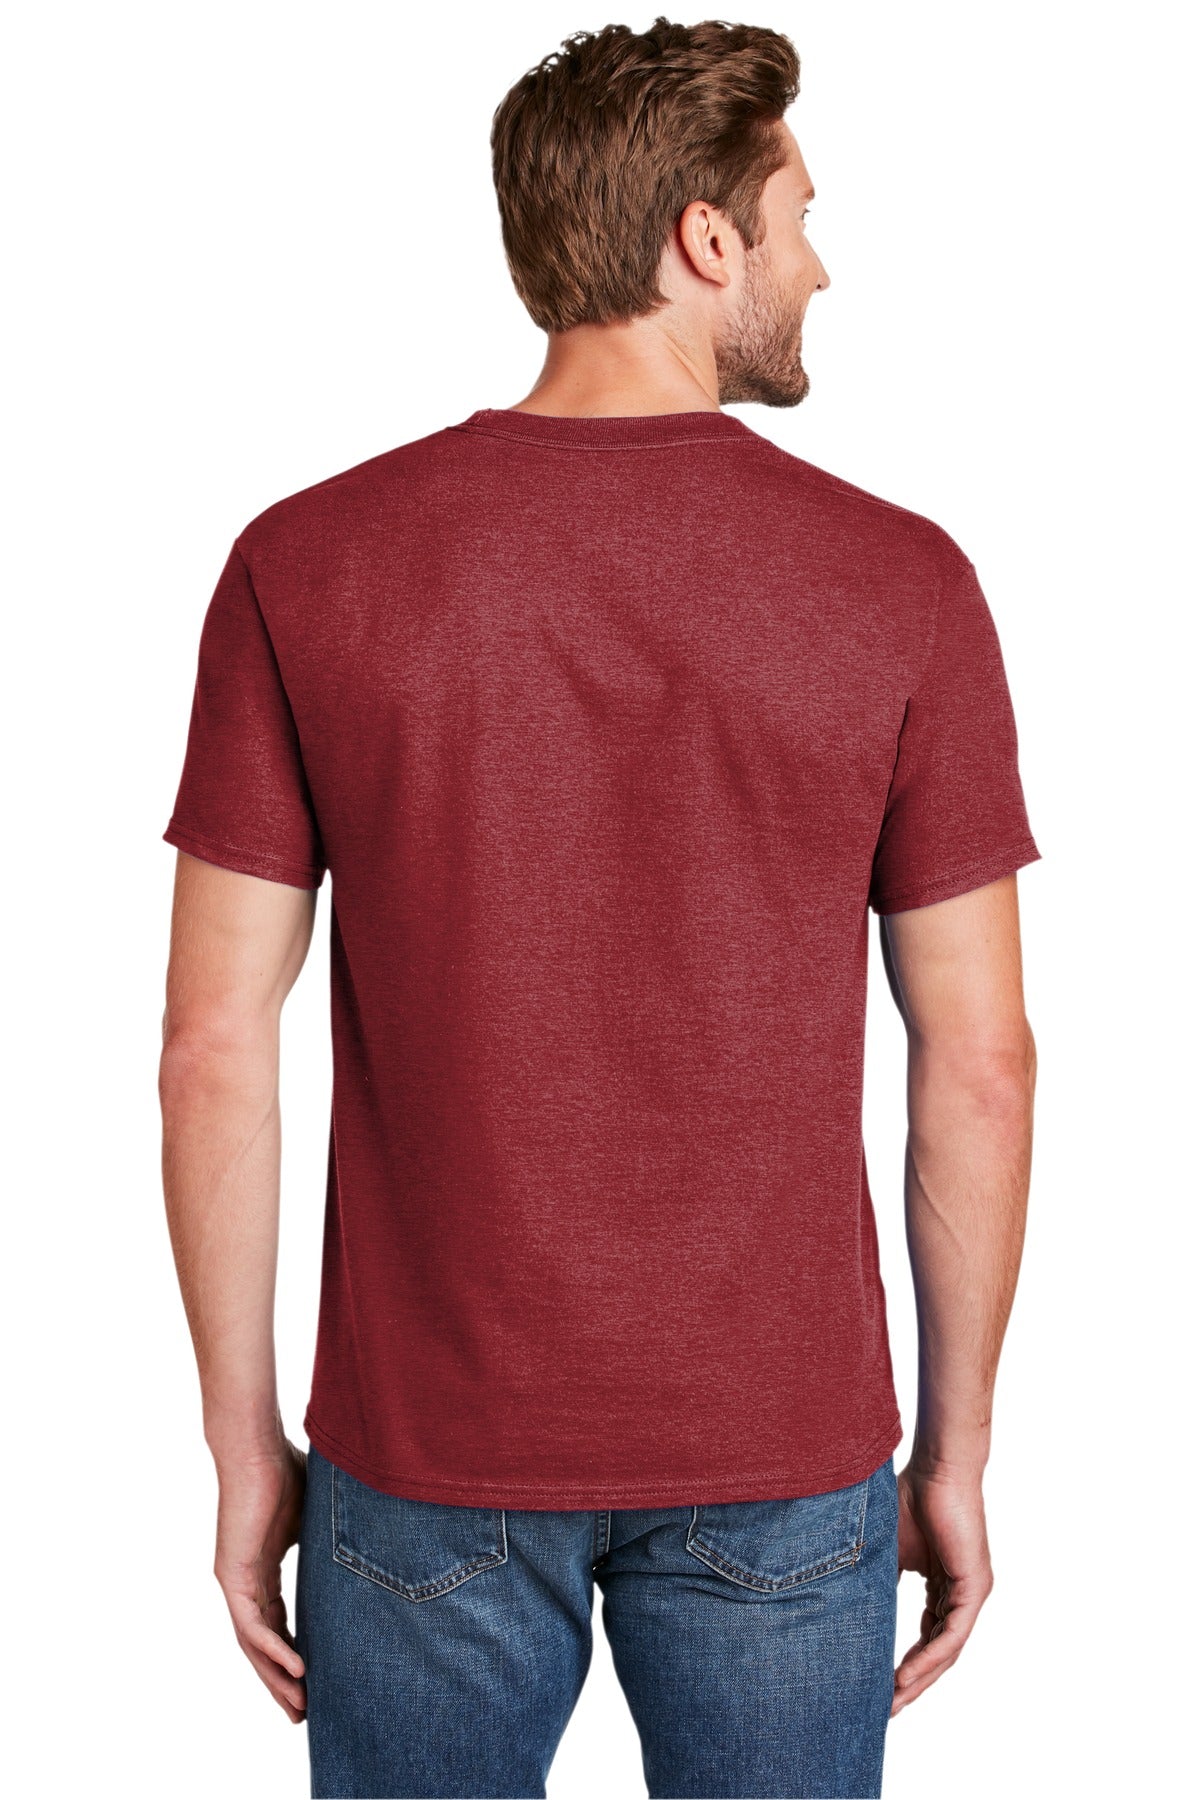 Hanes Beefy-T - 100% Cotton T-Shirt. 5180